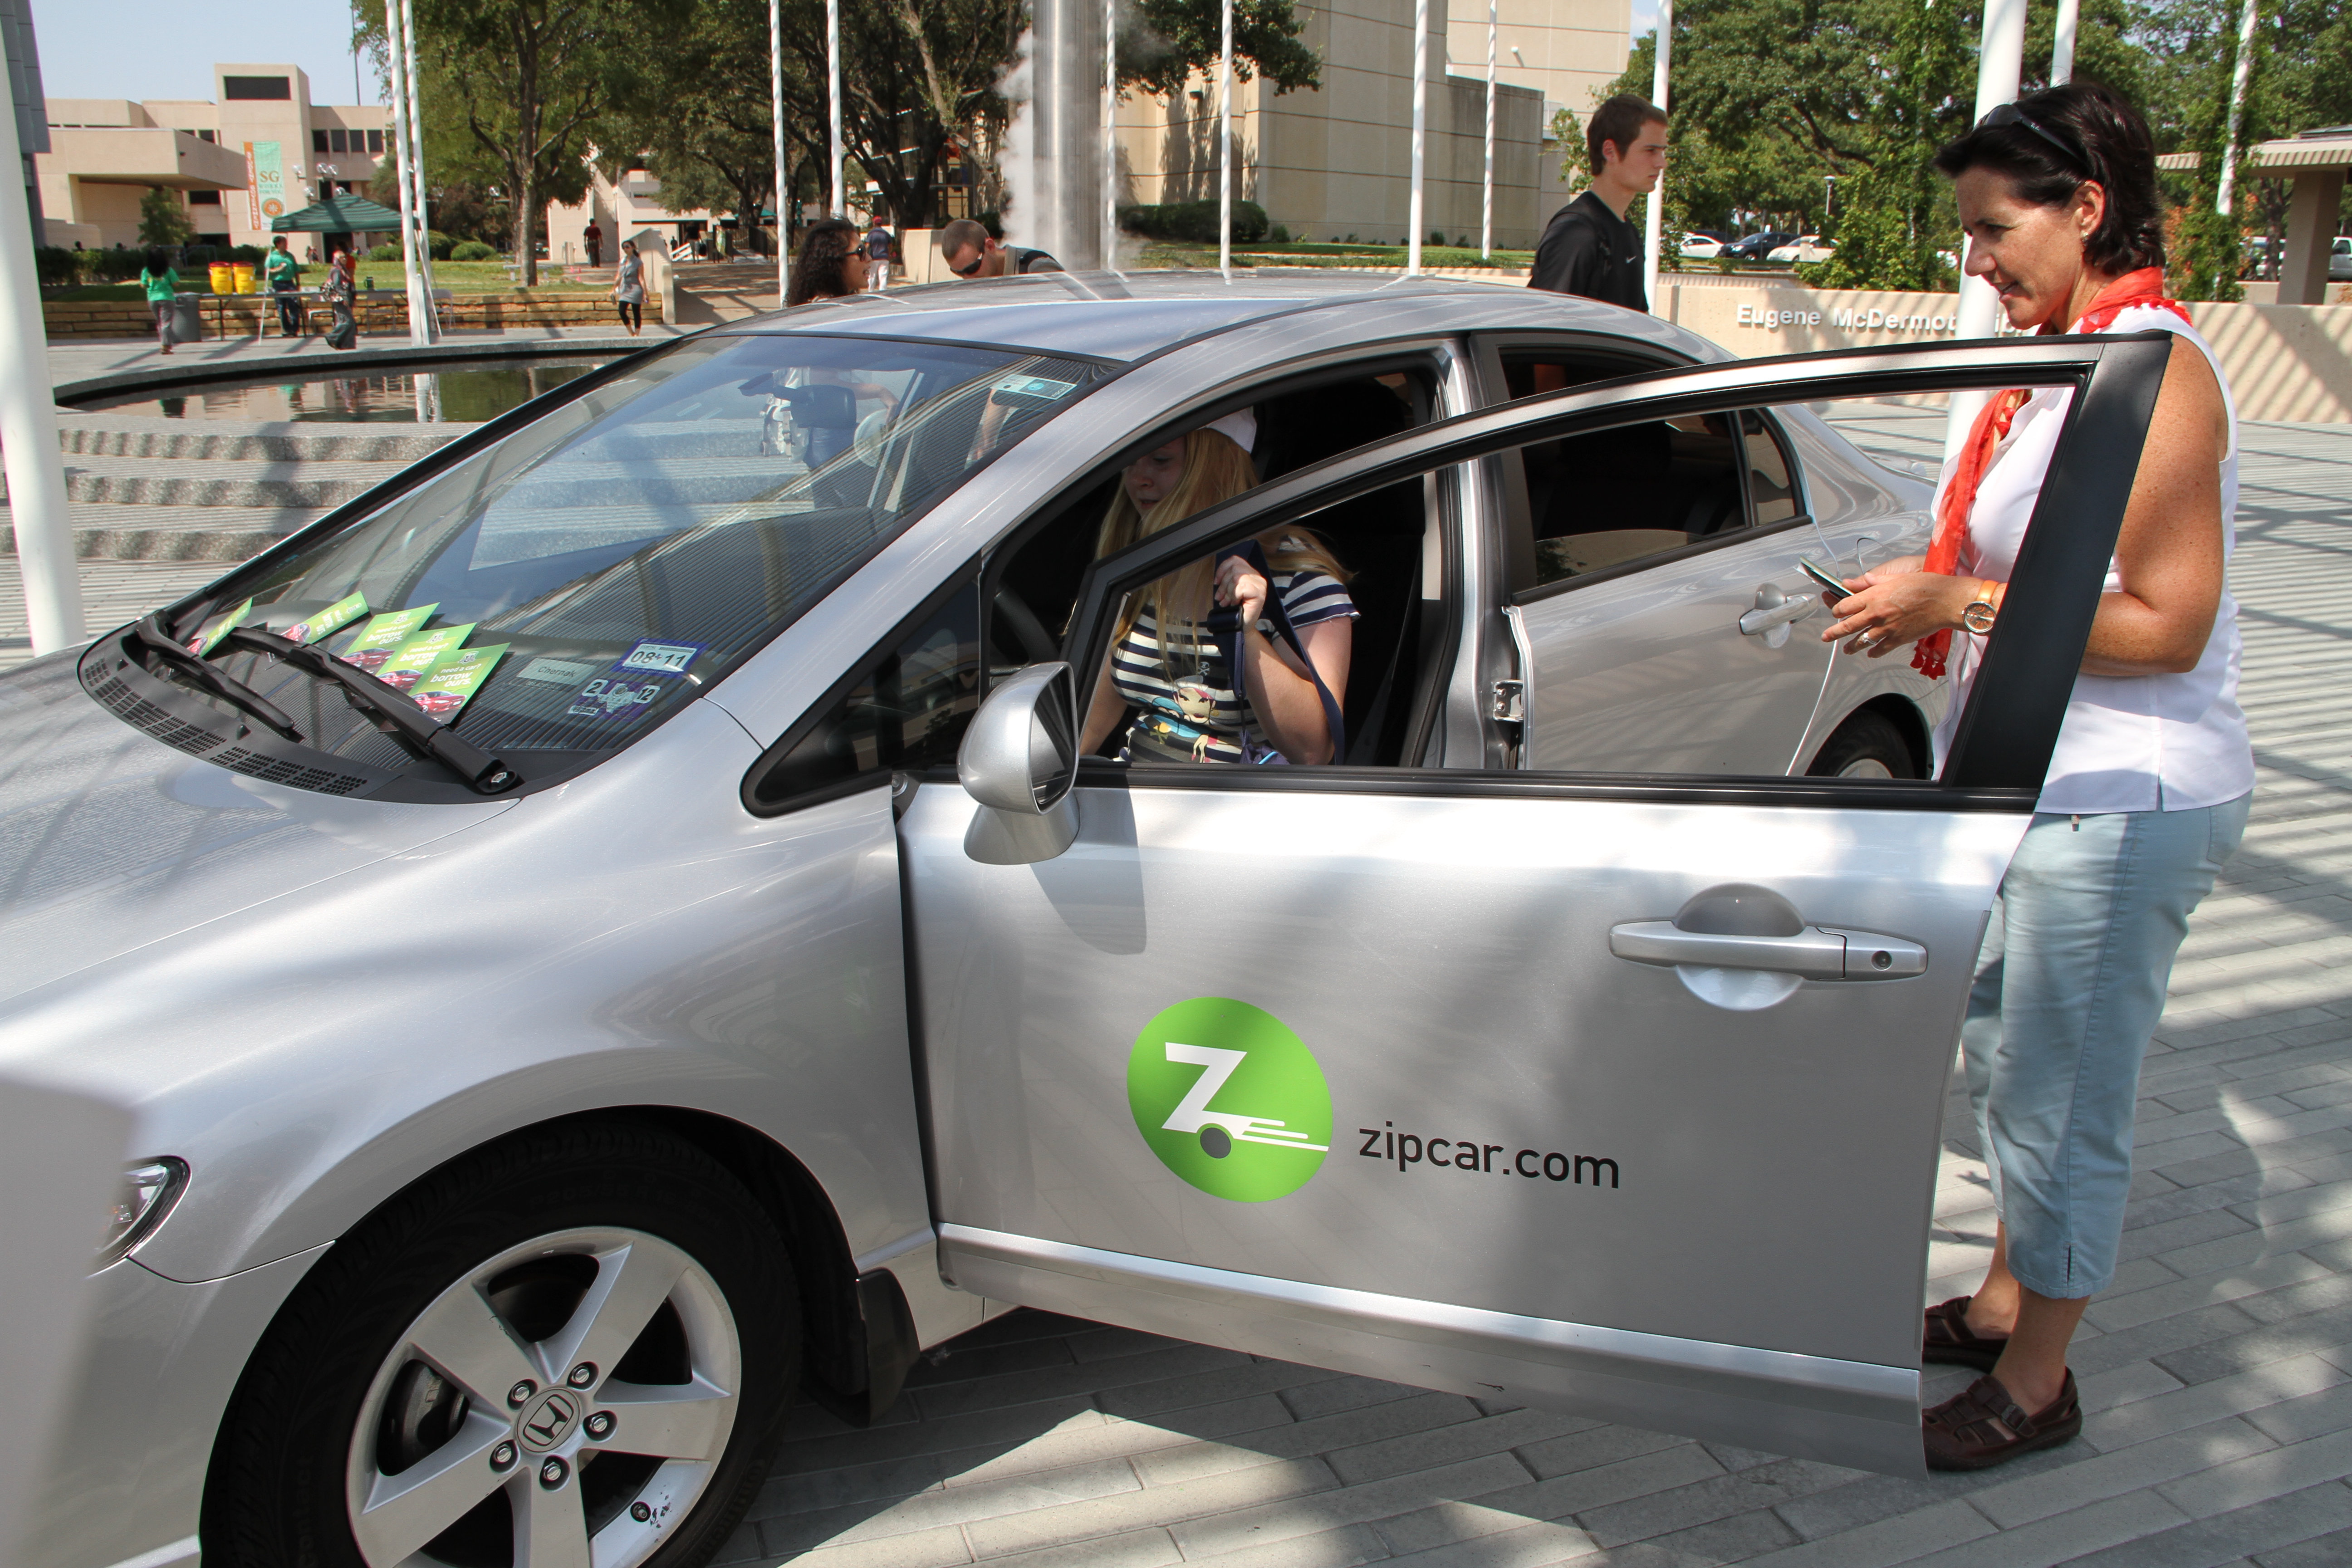 Zipcar caters to car-less students